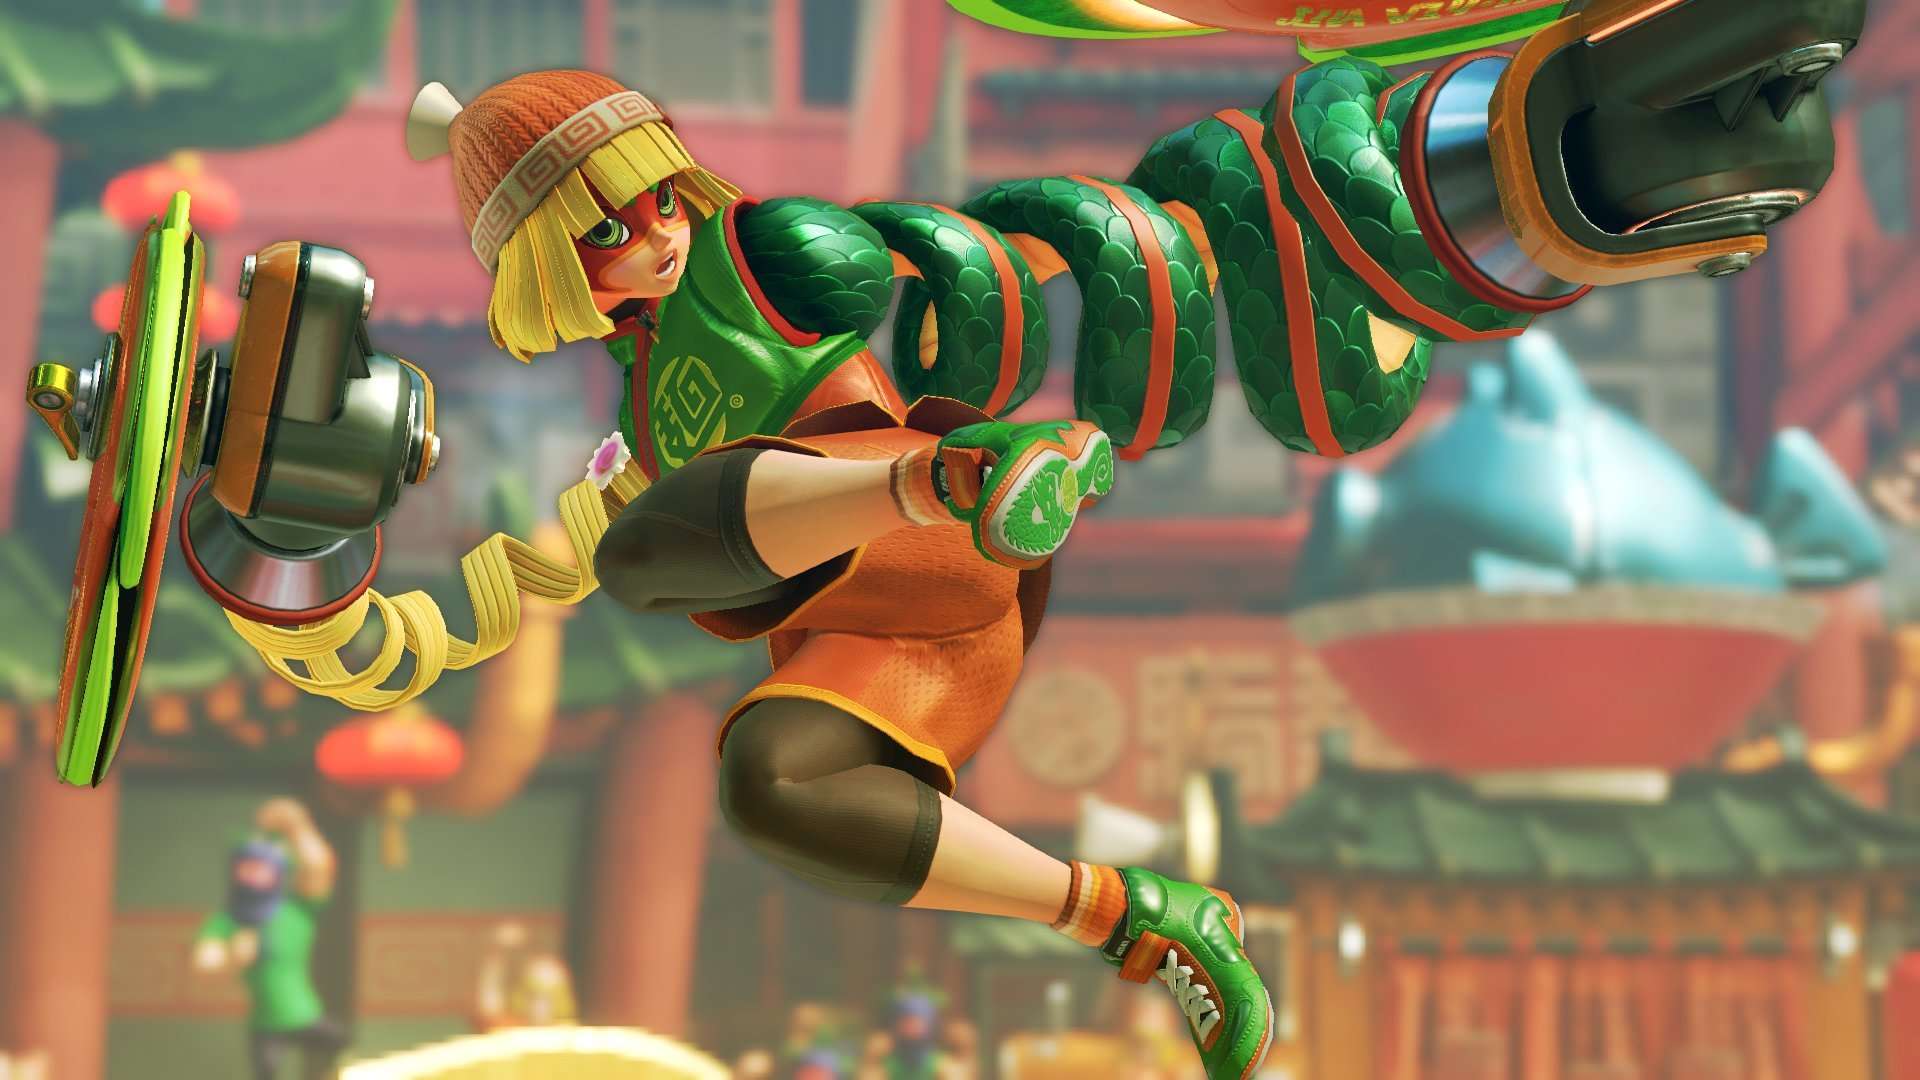 Nintendo Switch Exclusive Arms Will Launch Alongside New Joycon